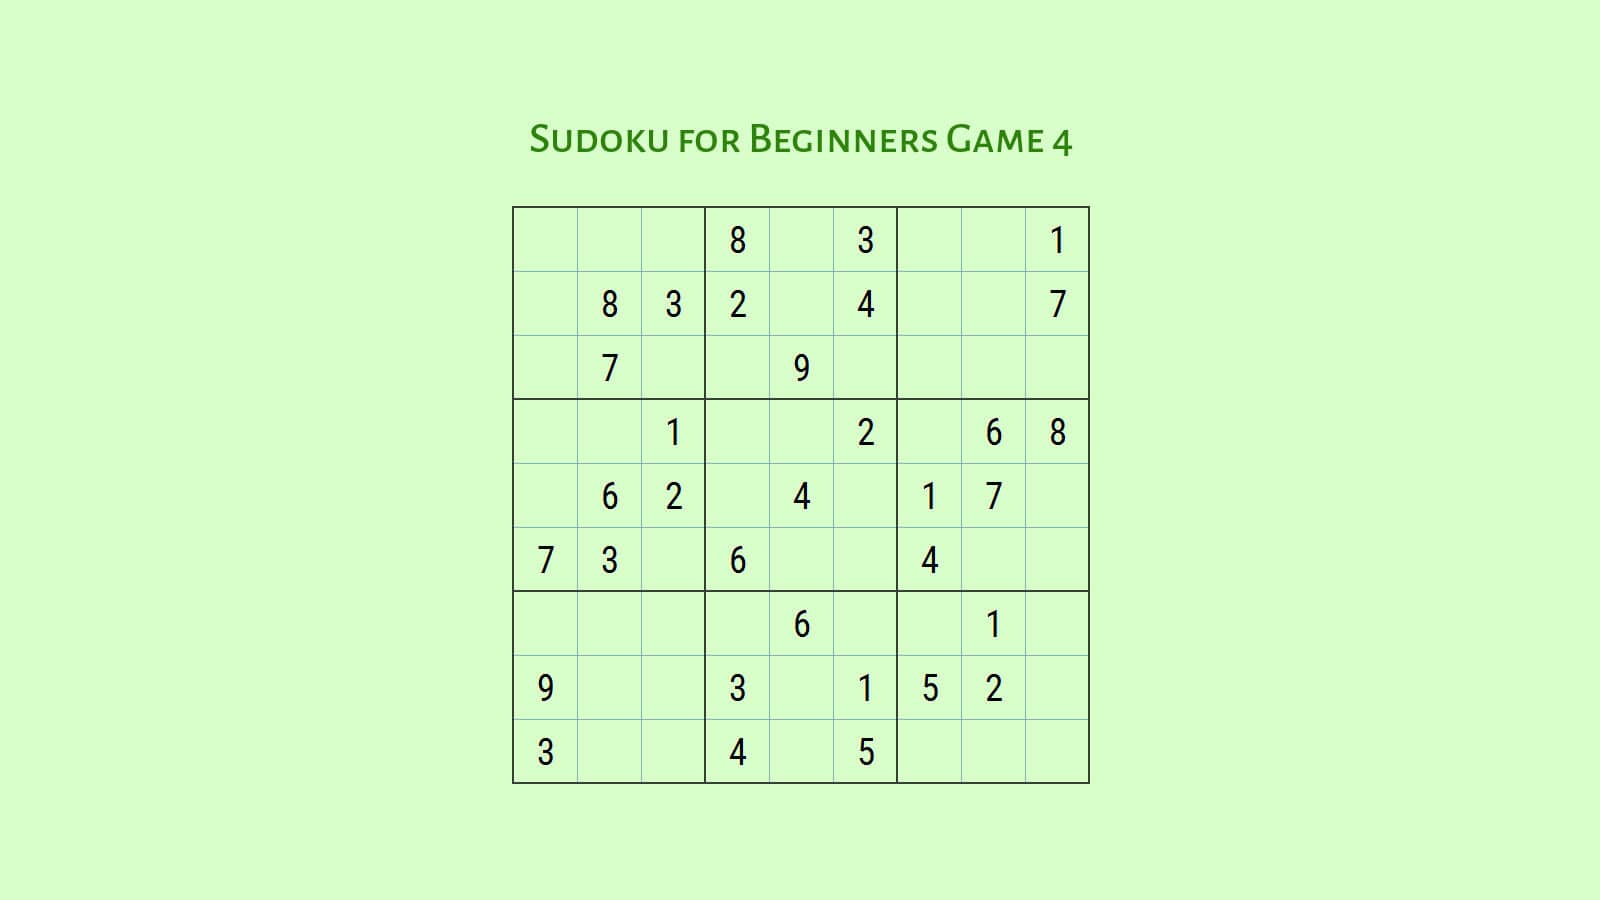 Learn how to play Sudoku with Sudoku for beginners game 4